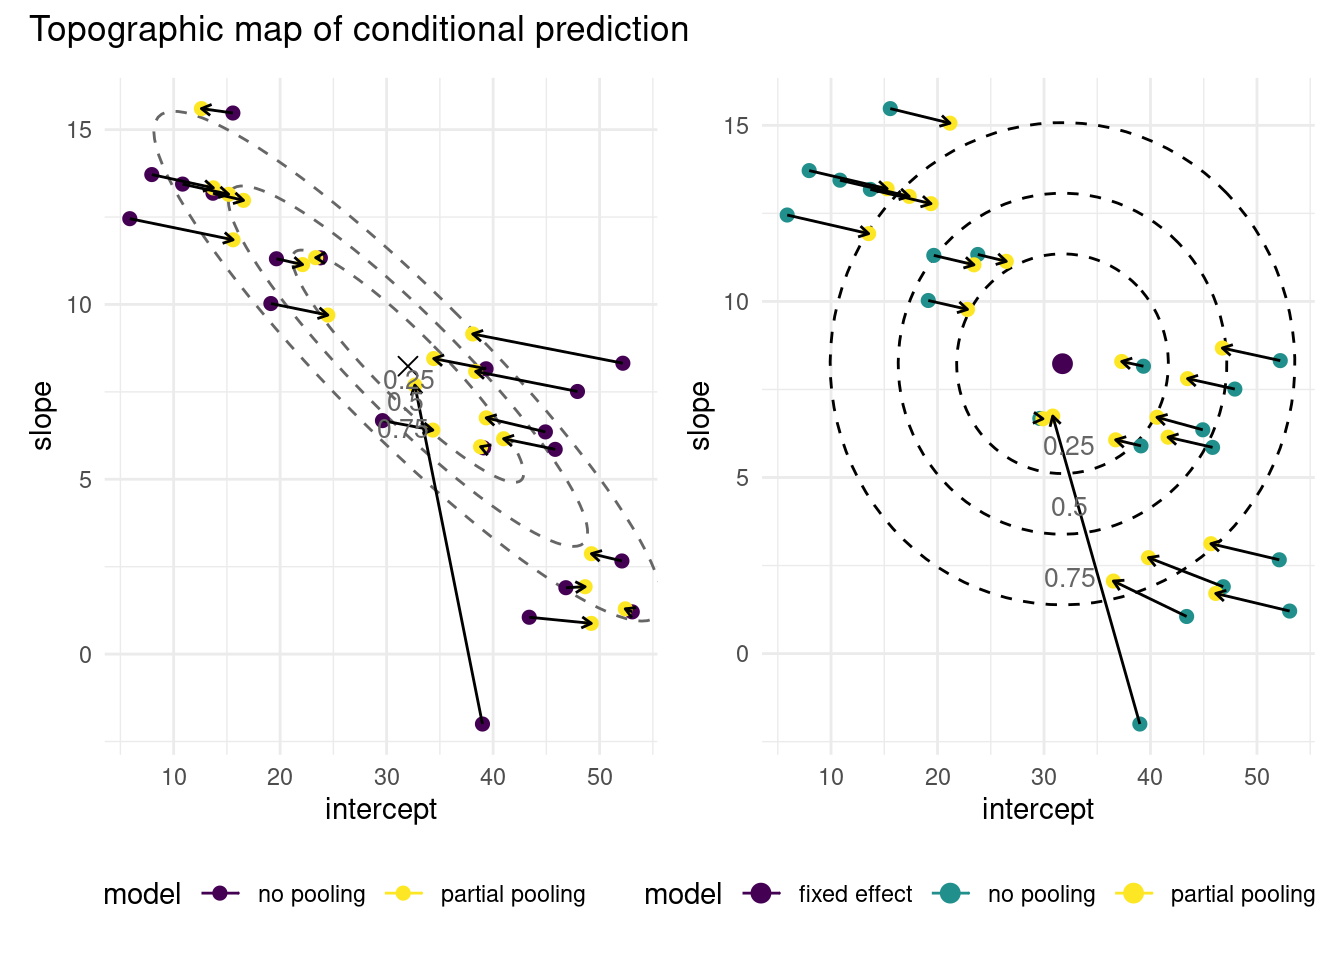 Graph of conditional predictions for the model with correlated (left) and independent (right) random effects on the intercept and slope of the chicken weight data. The conditional predictions, which include the predicted random effect specific to each chick, are shrunk towards the fixed effect, located in regions. The normal specification on the random errors induces a penalty for the estimates, which explains shrinkage. Adding correlation changes the shape of the penalty region (ellipsoidal rather than circular), thus inducing different constraints. Shorter series (fewer observations by chicken) are shrunk more towards the global estimated average.